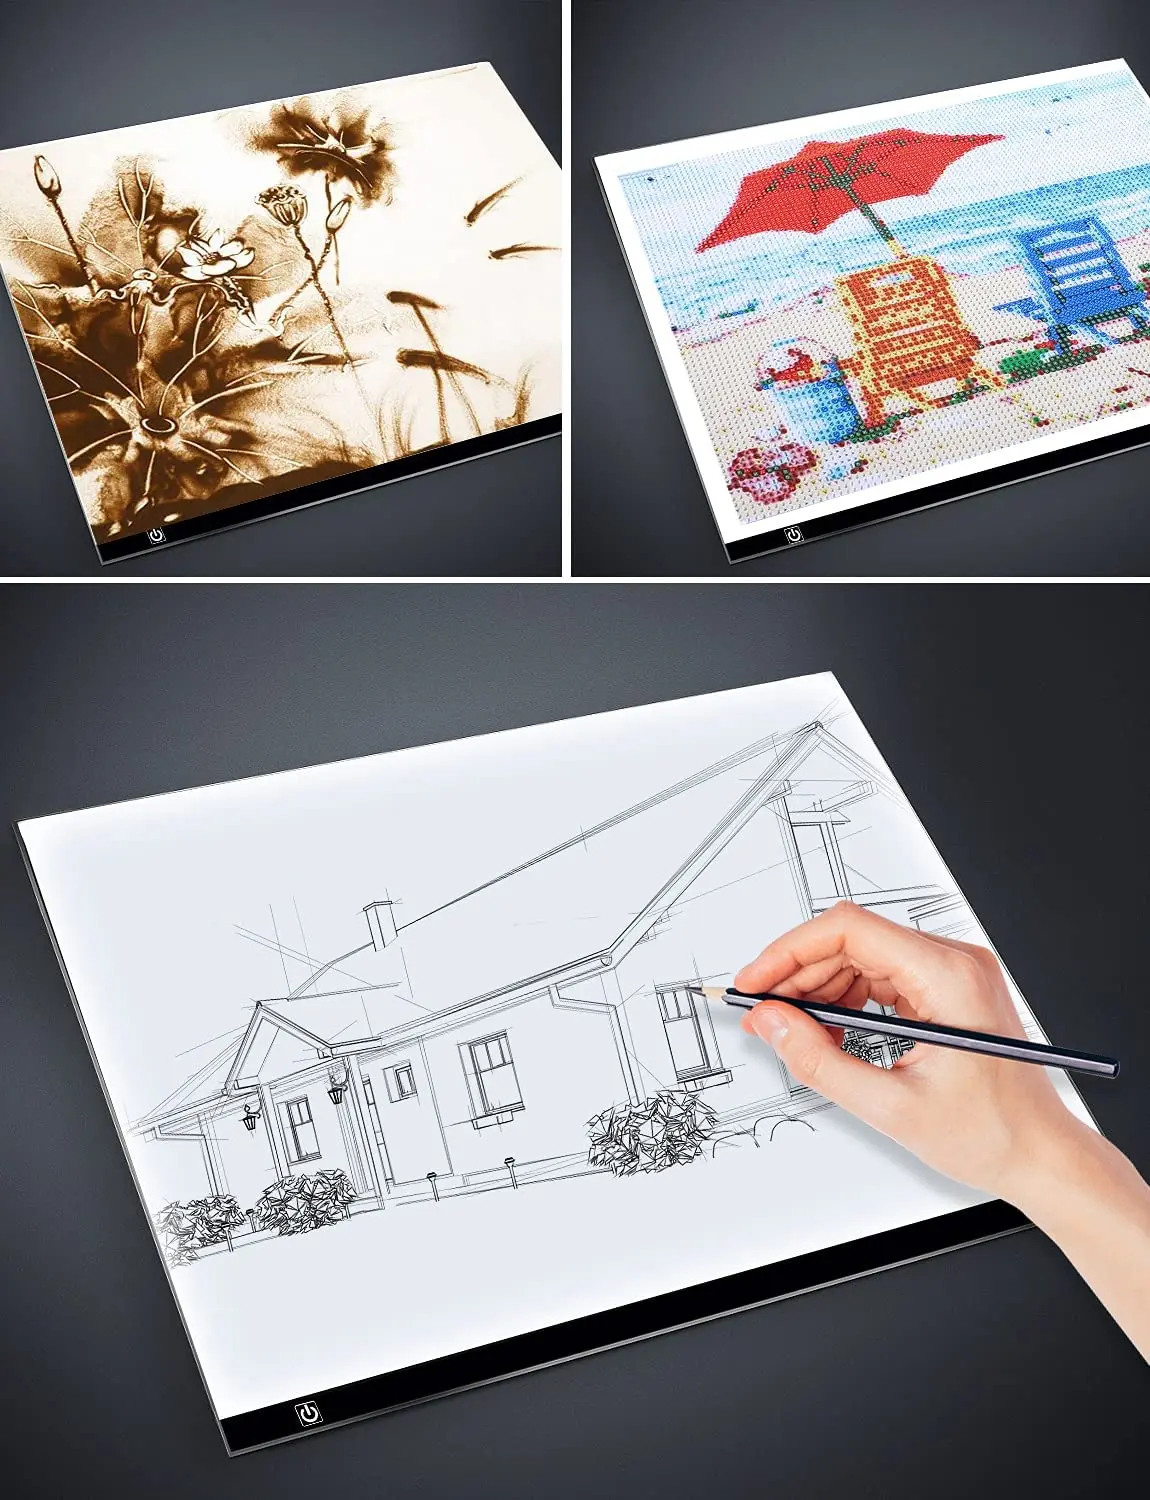 A3 Light pad Box Table Board for Diamond Painting Accessories Art